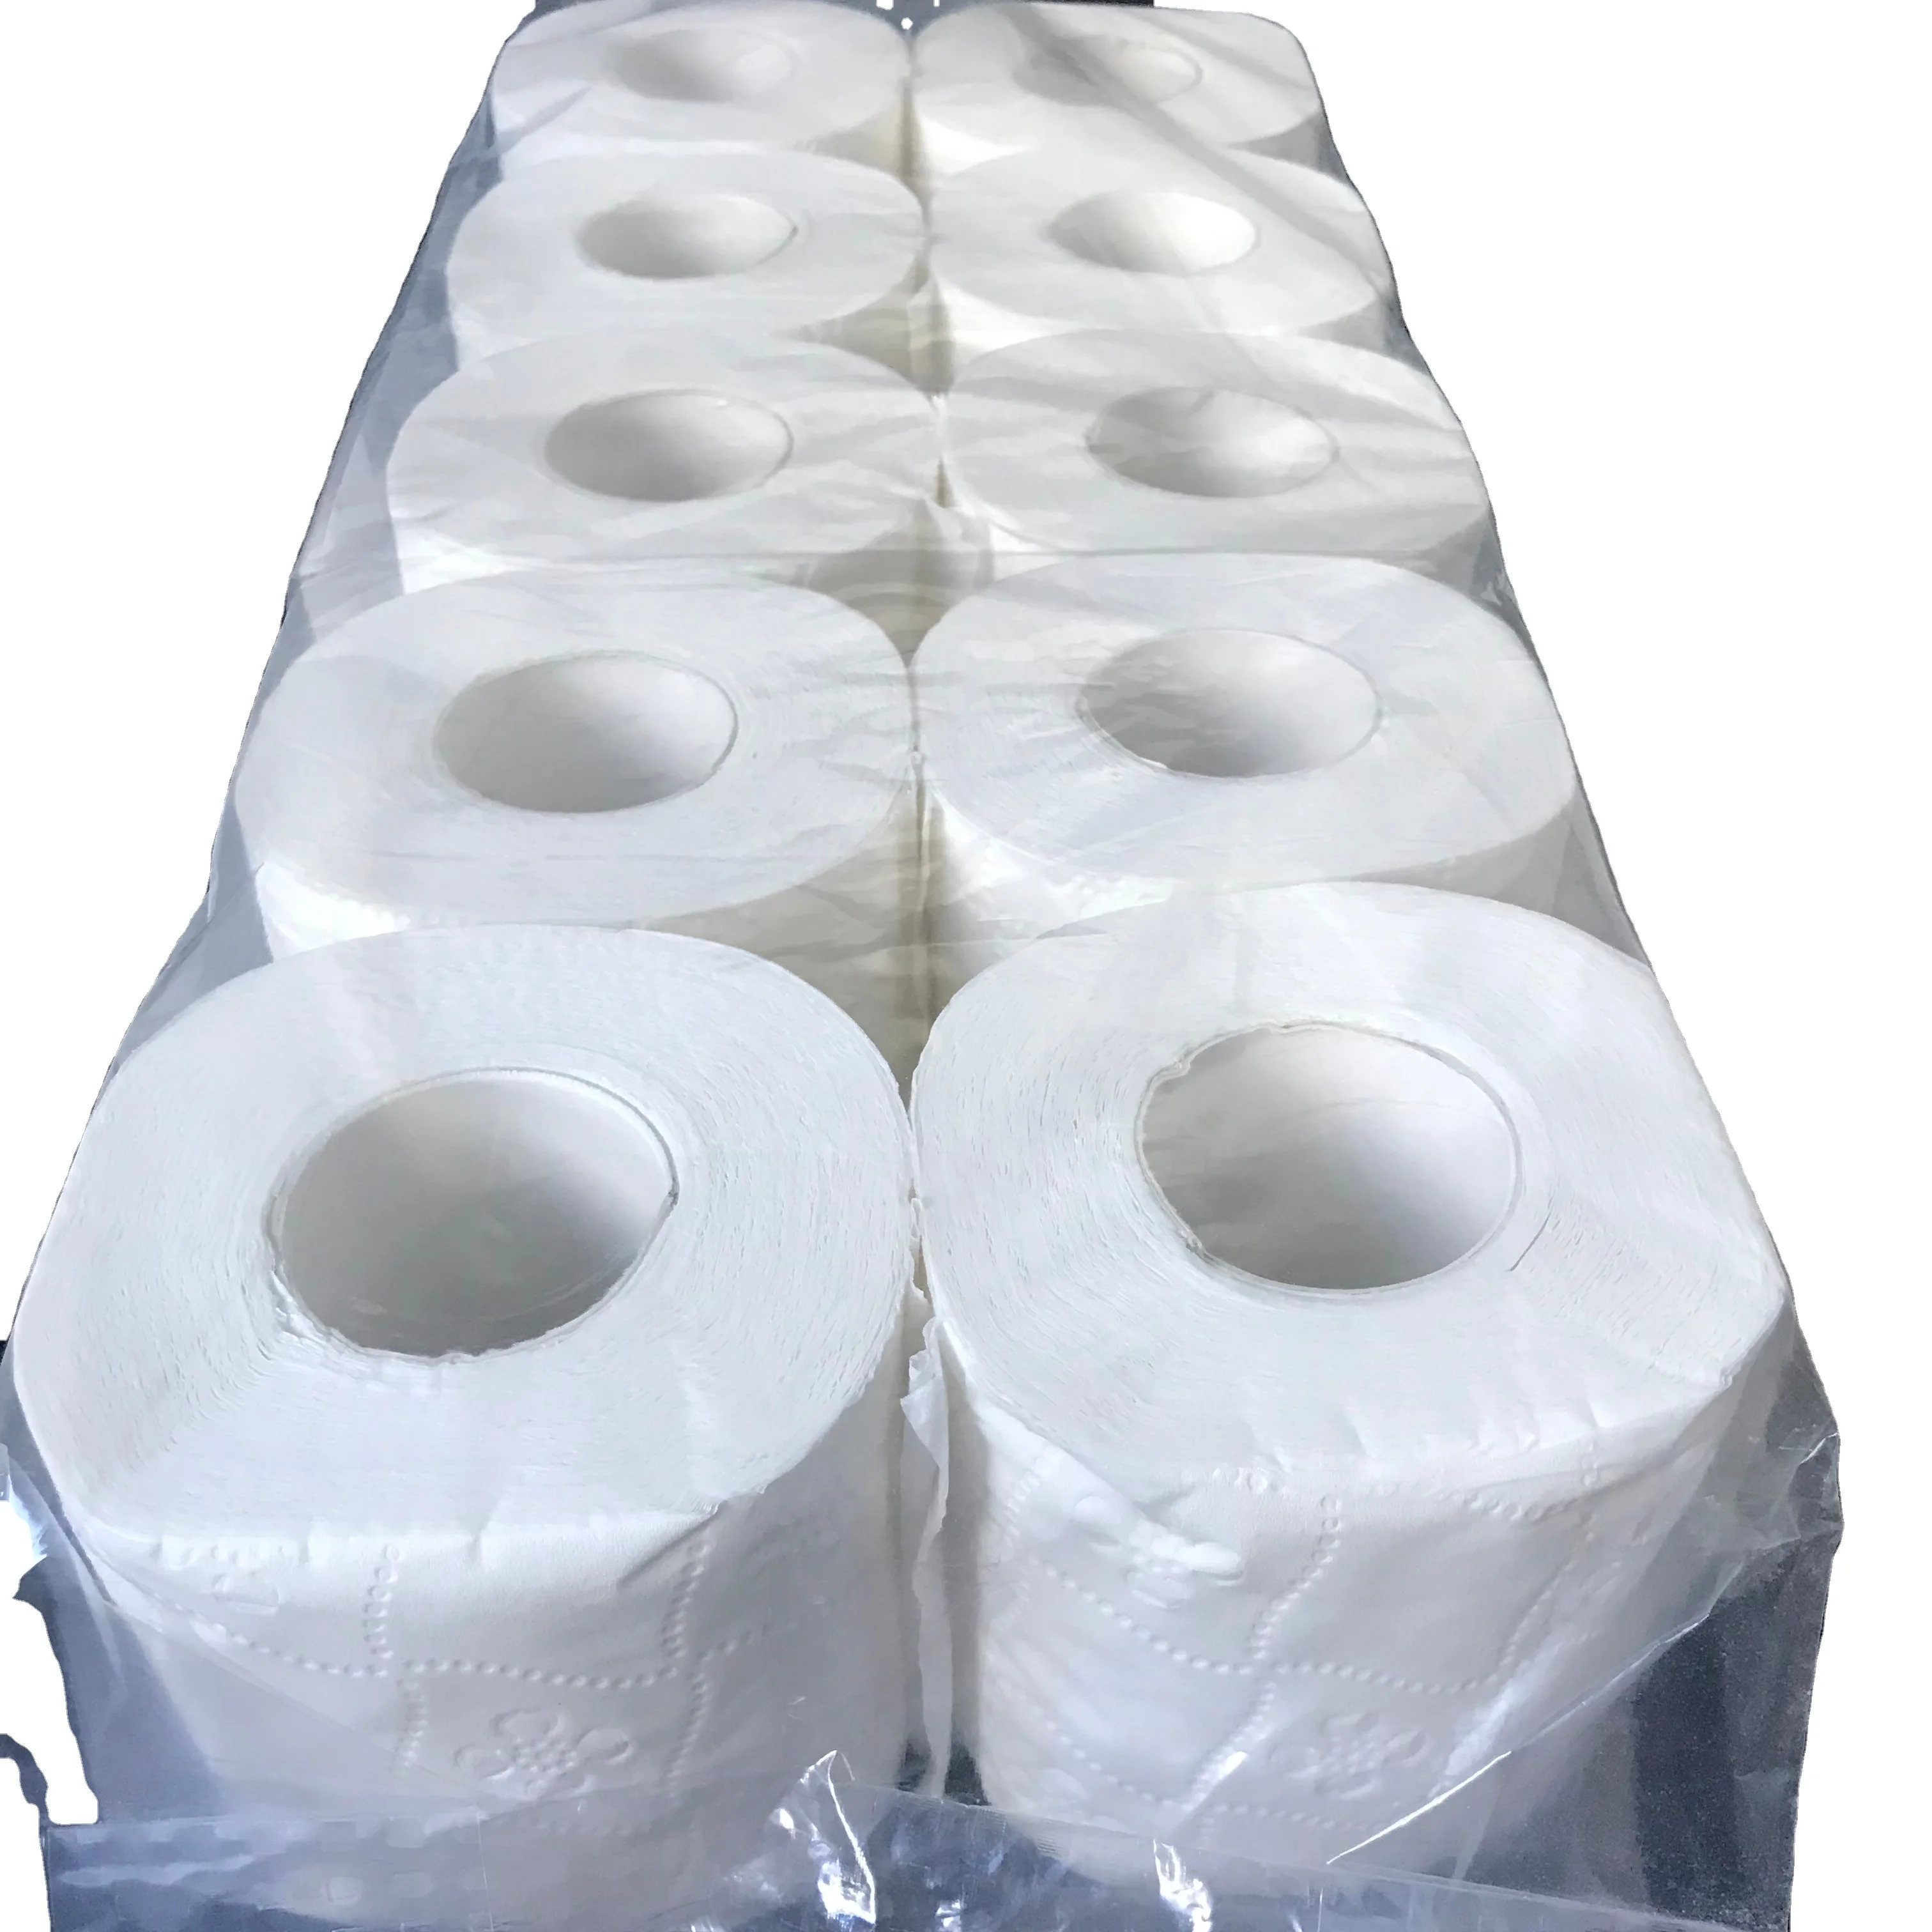 China  low price 100% virgin wood pulp 3ply toilet paper rolls tissue soft fsc